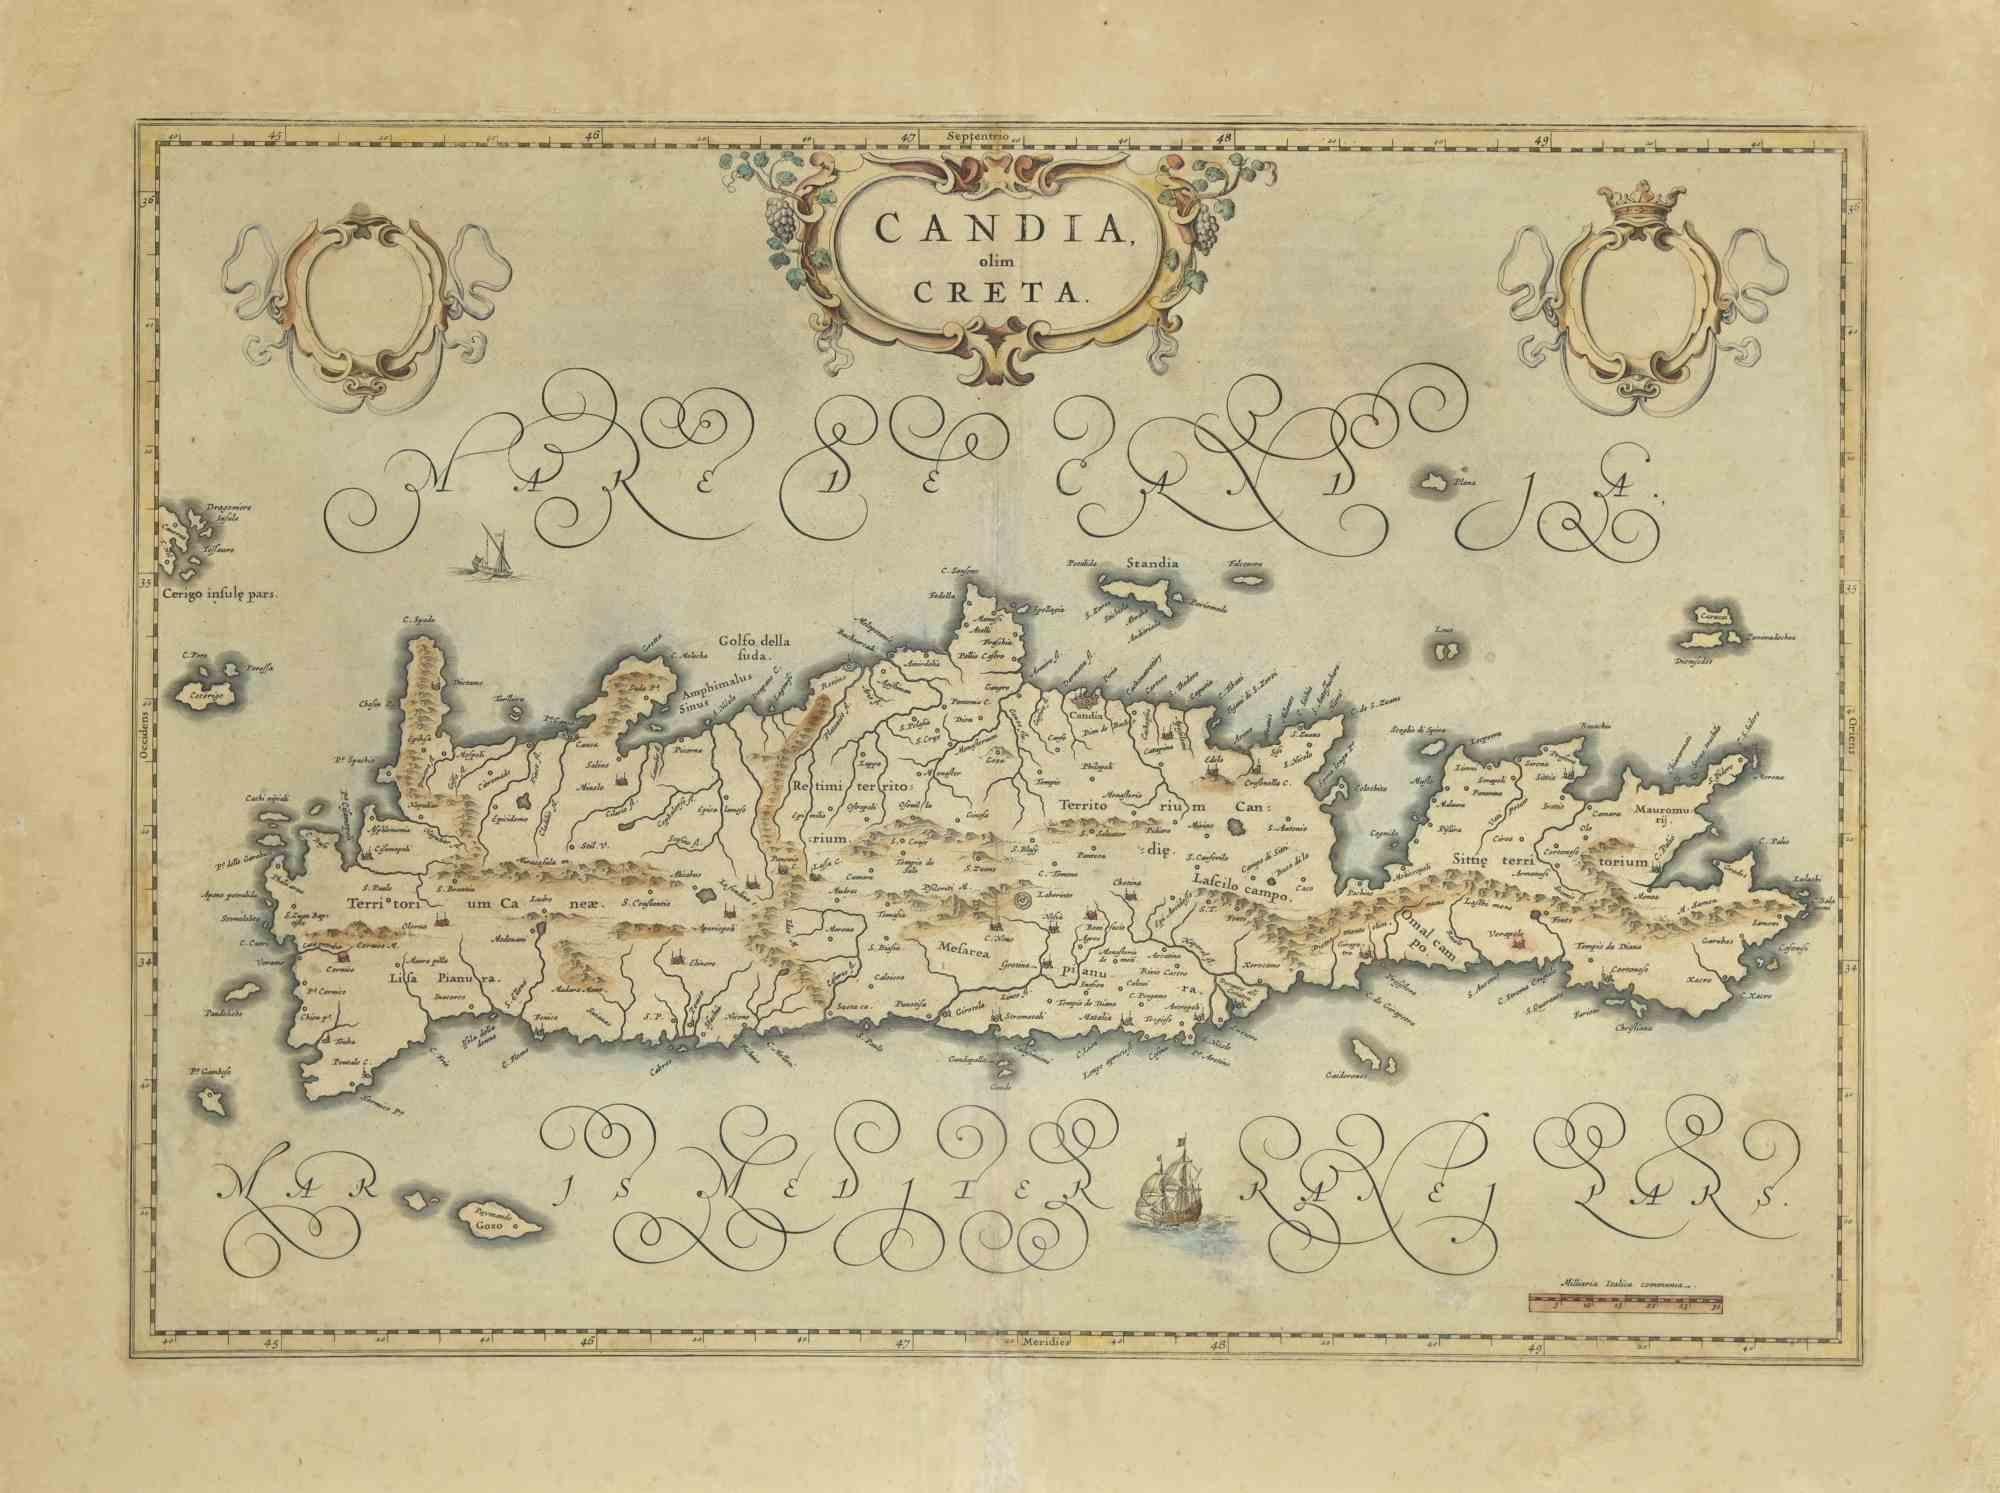 Map of Crete (Candia olim Creta) is an etching realized by Johannes BLAEU (1596-1673) in 1650s. 

Etching hand watercolored. 

The renowned map of the island of Crete by Blaeu, hand-colored at the time.

Rare and in good condition.

Joan Blaeu (23